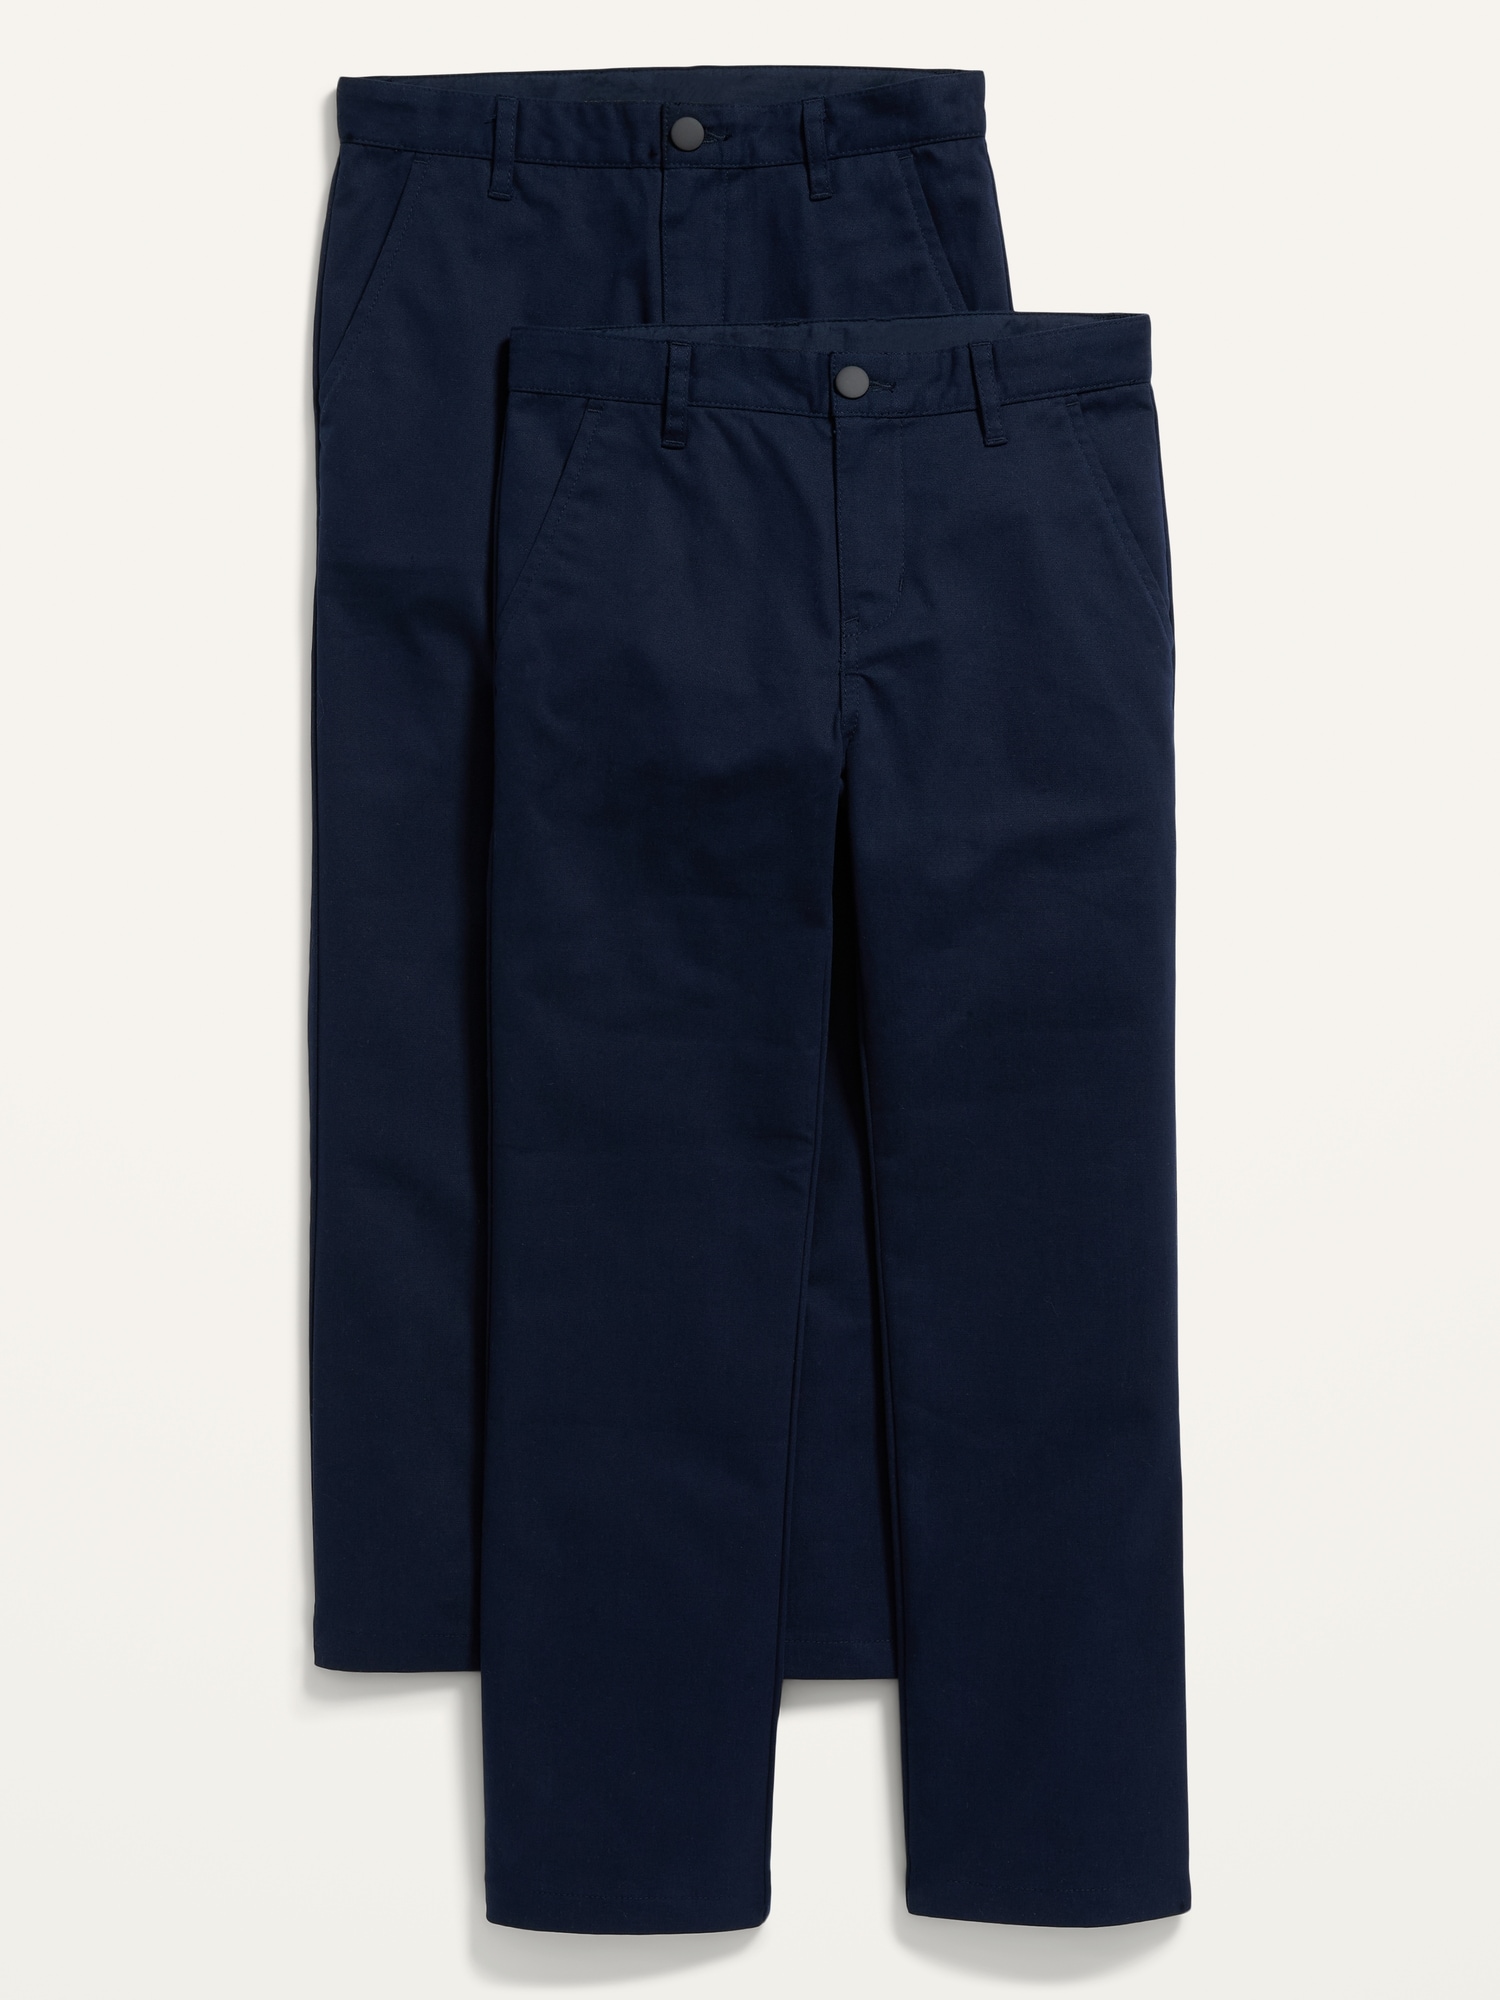 Old Navy Uniform Straight Pants 2-Pack For Boys blue - 875595023